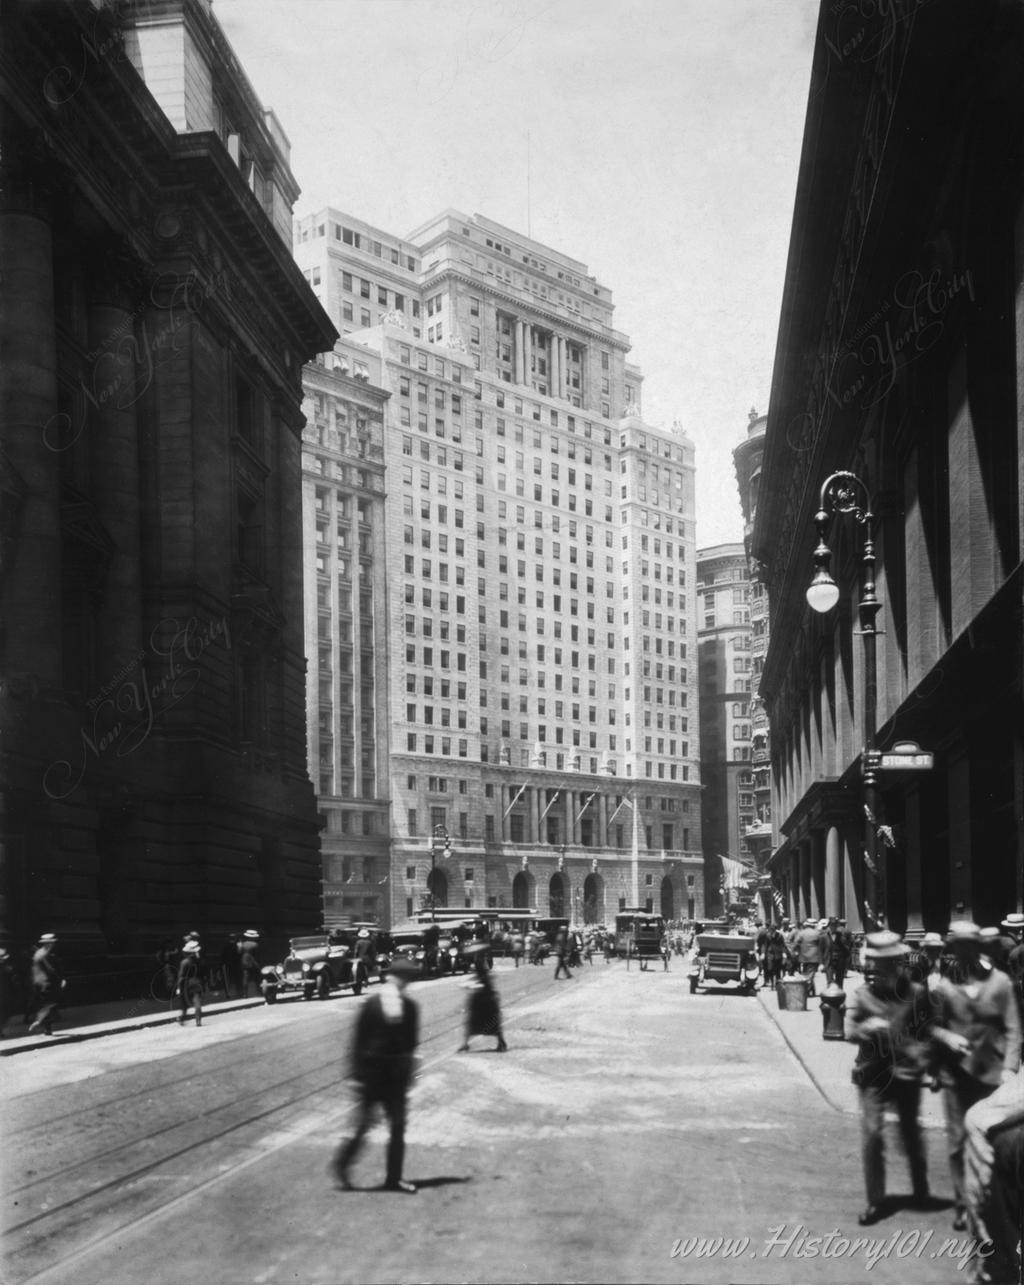 Photograph of The Cunard Building, also known as the Standard & Poors Building - a 22-story office building located at 25 Broadway next to Bowling Green Park.